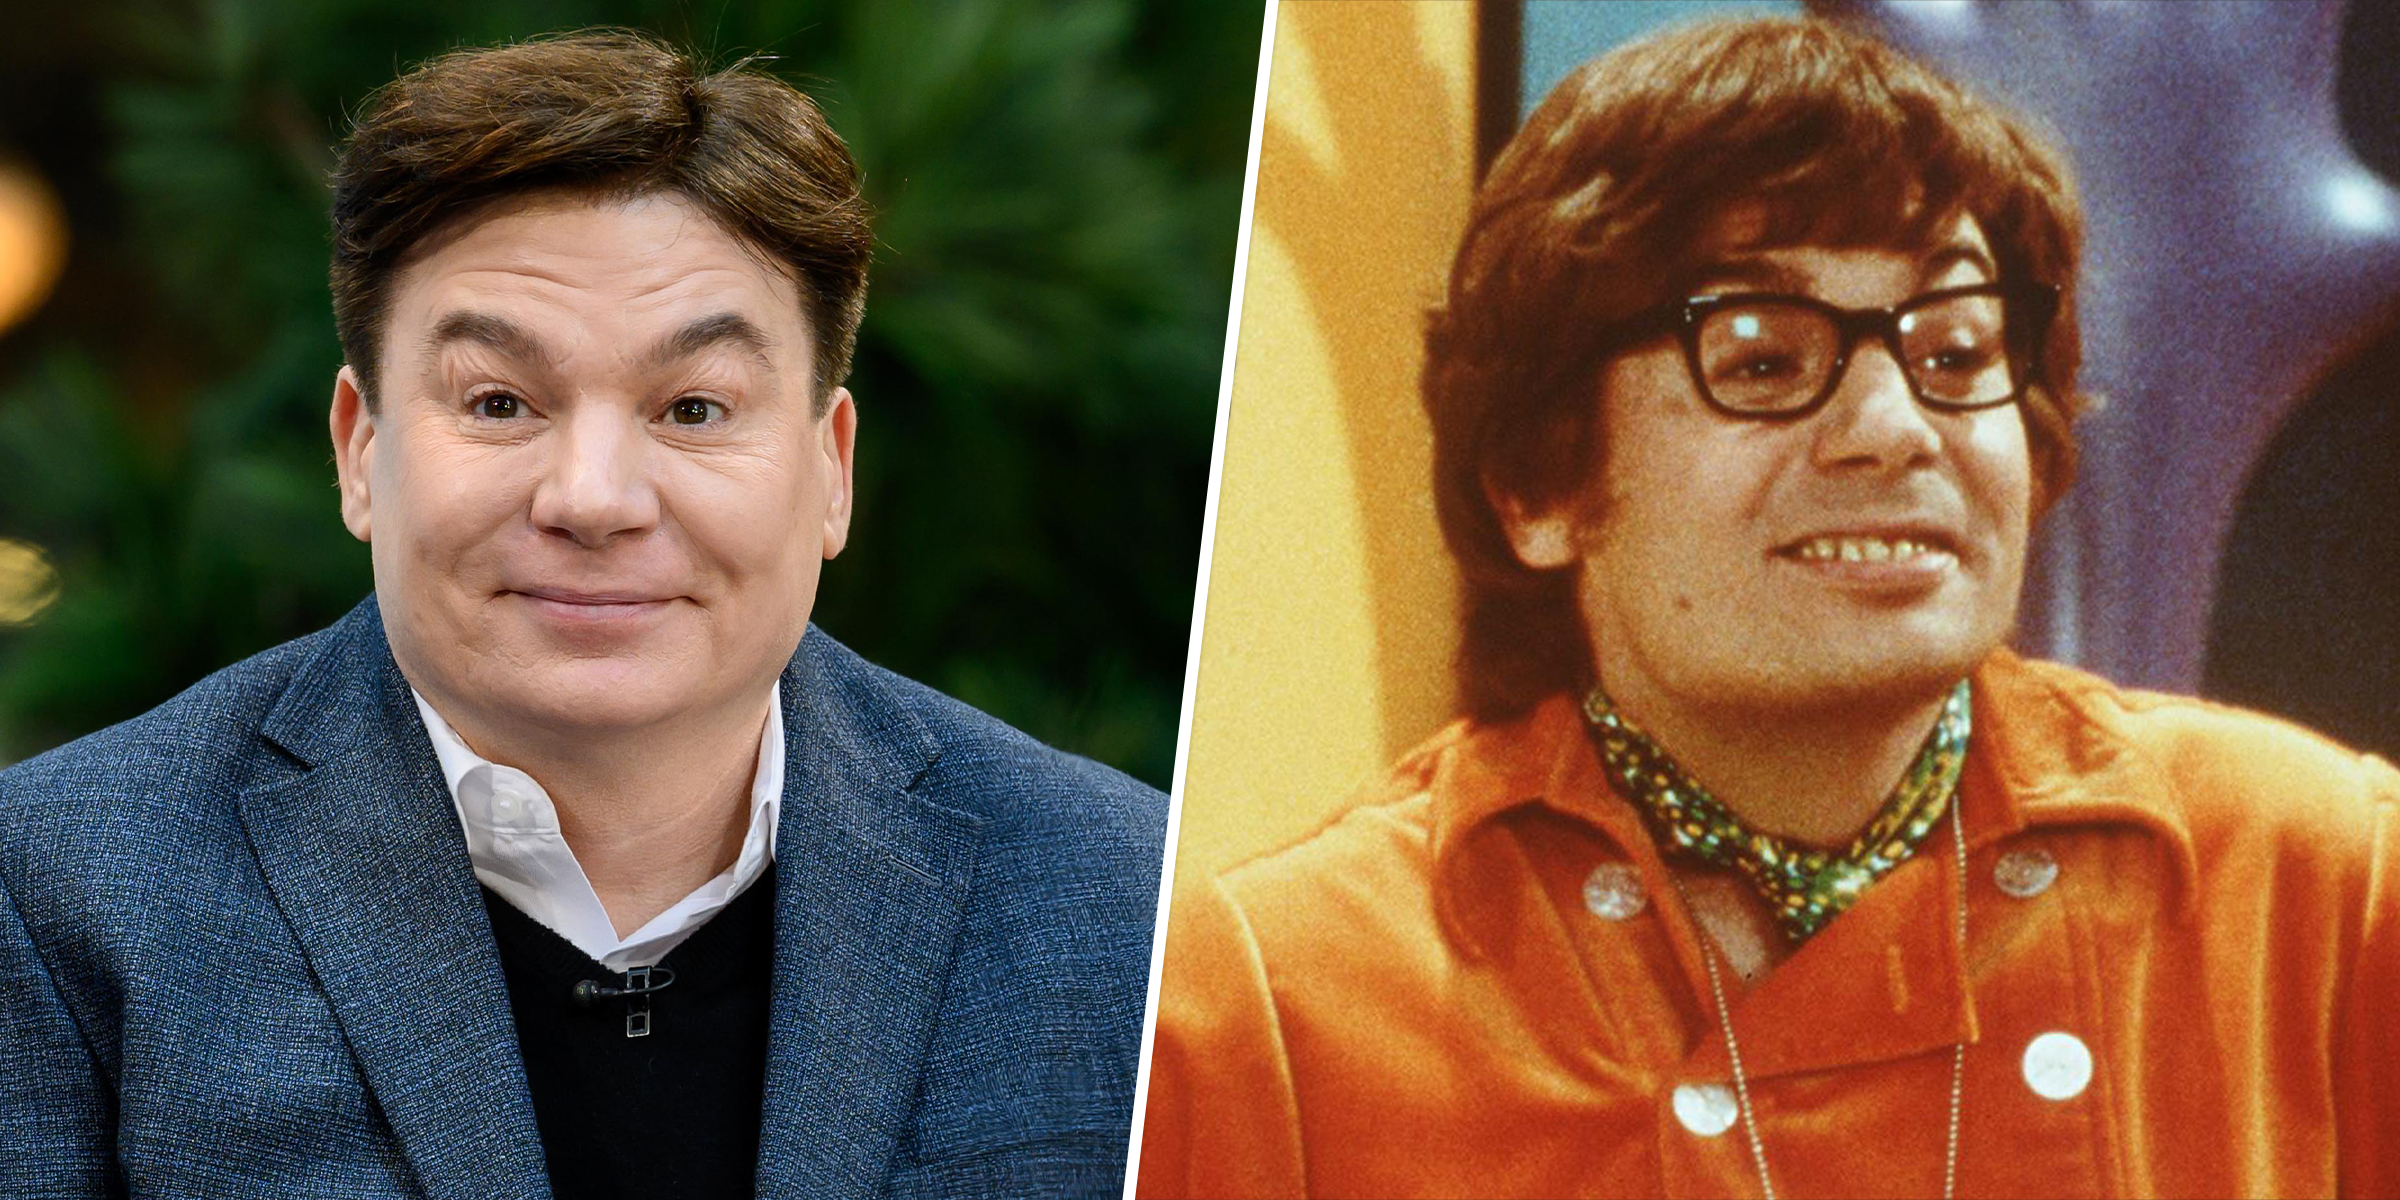 mike Myers Says Hed Love To Do Another Austin Powers Movie